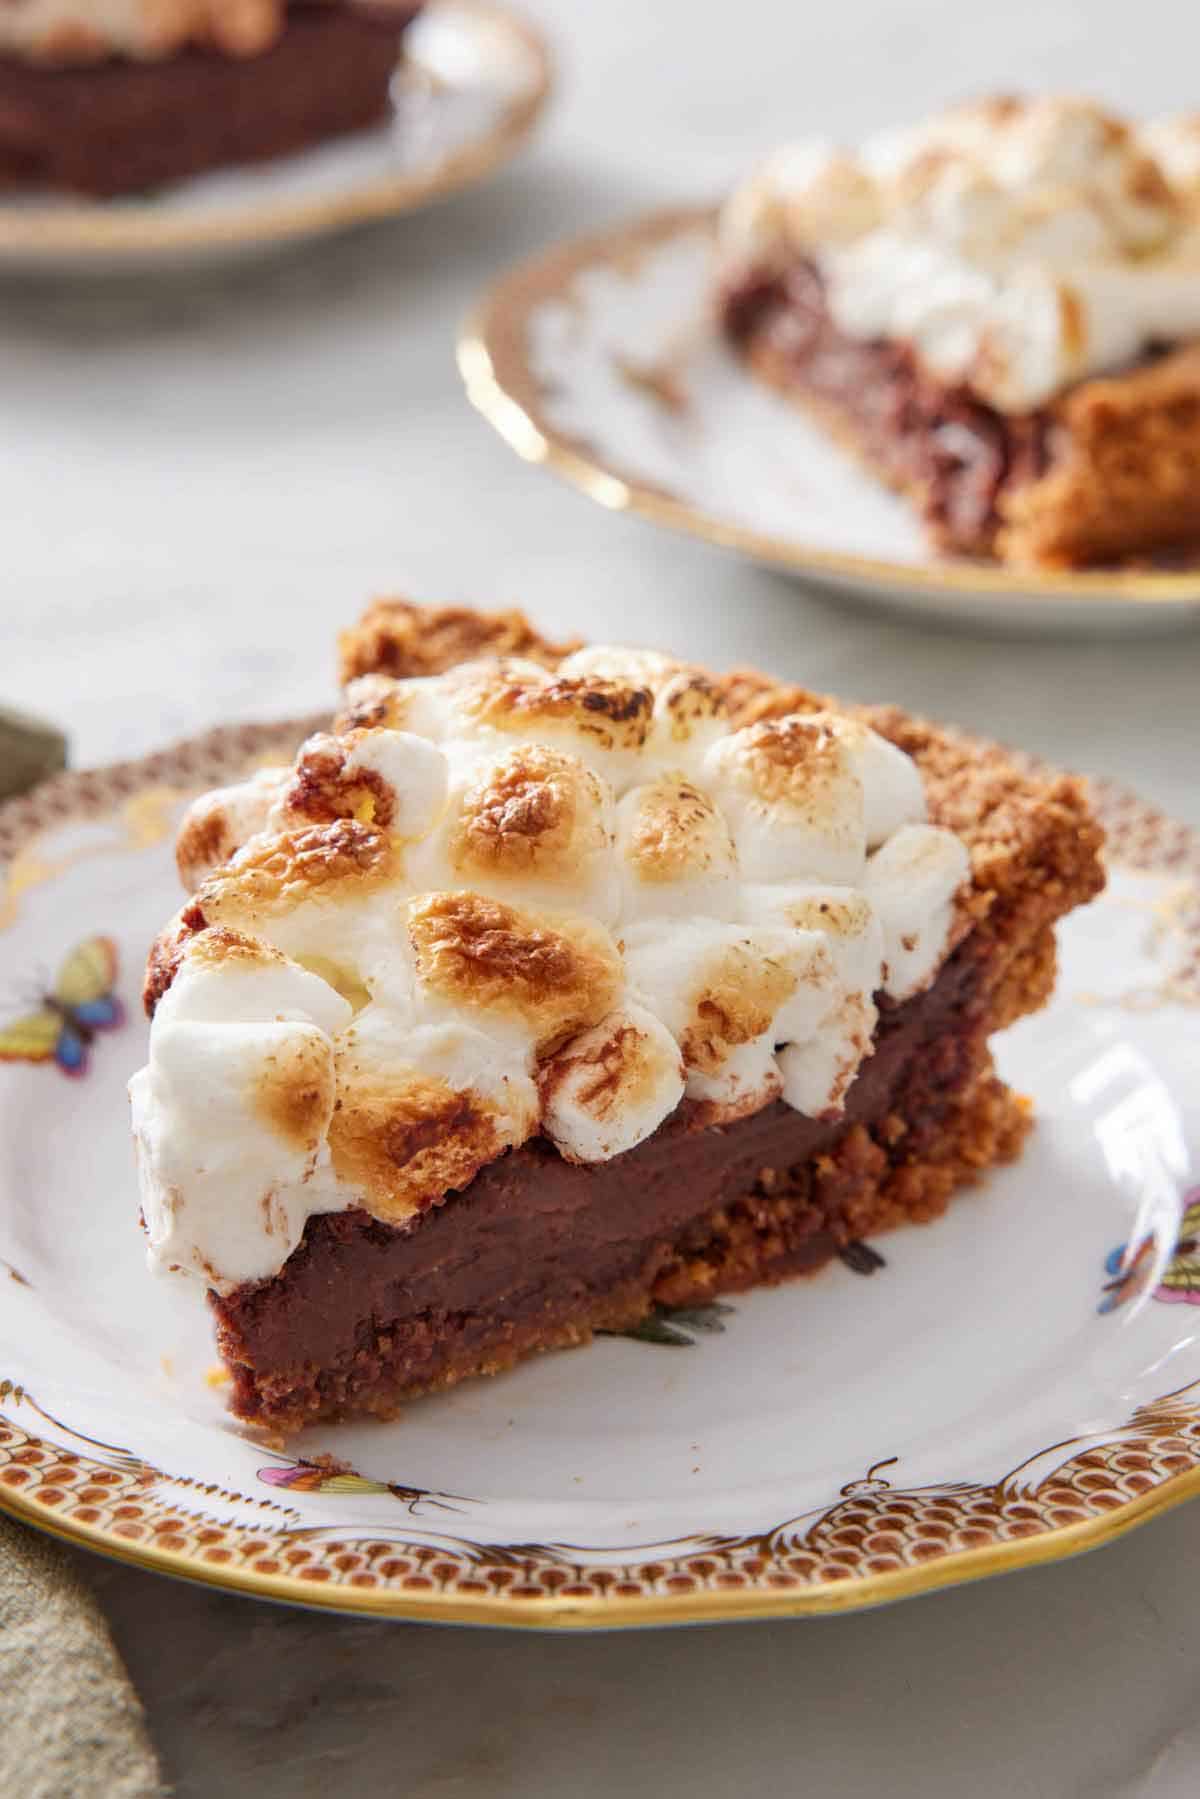 A plate with a slice of s'more pie with another in the background.